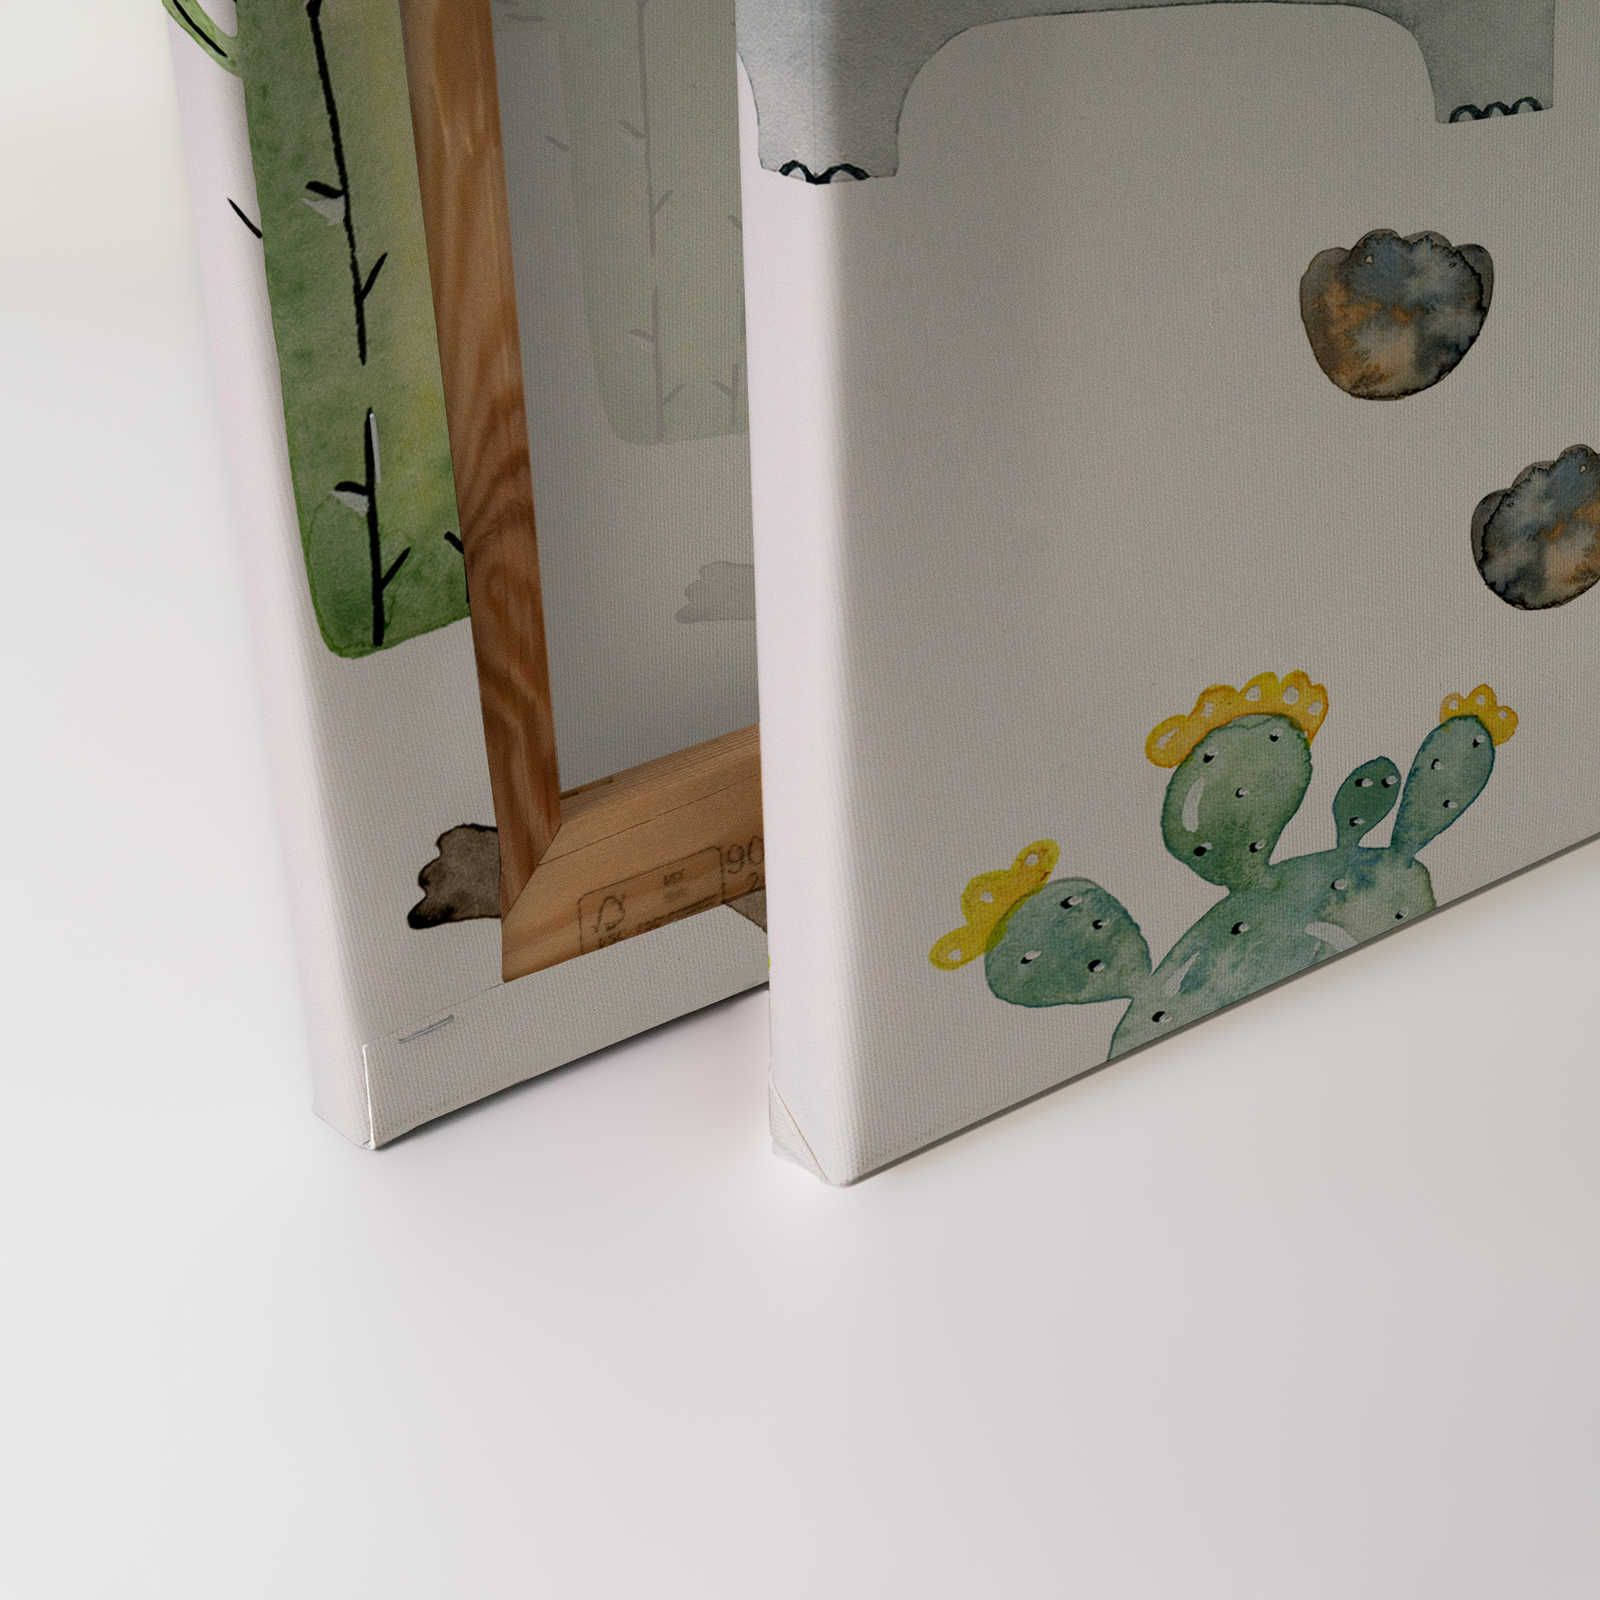             Canvas with animals and cacti - 90 cm x 60 cm
        